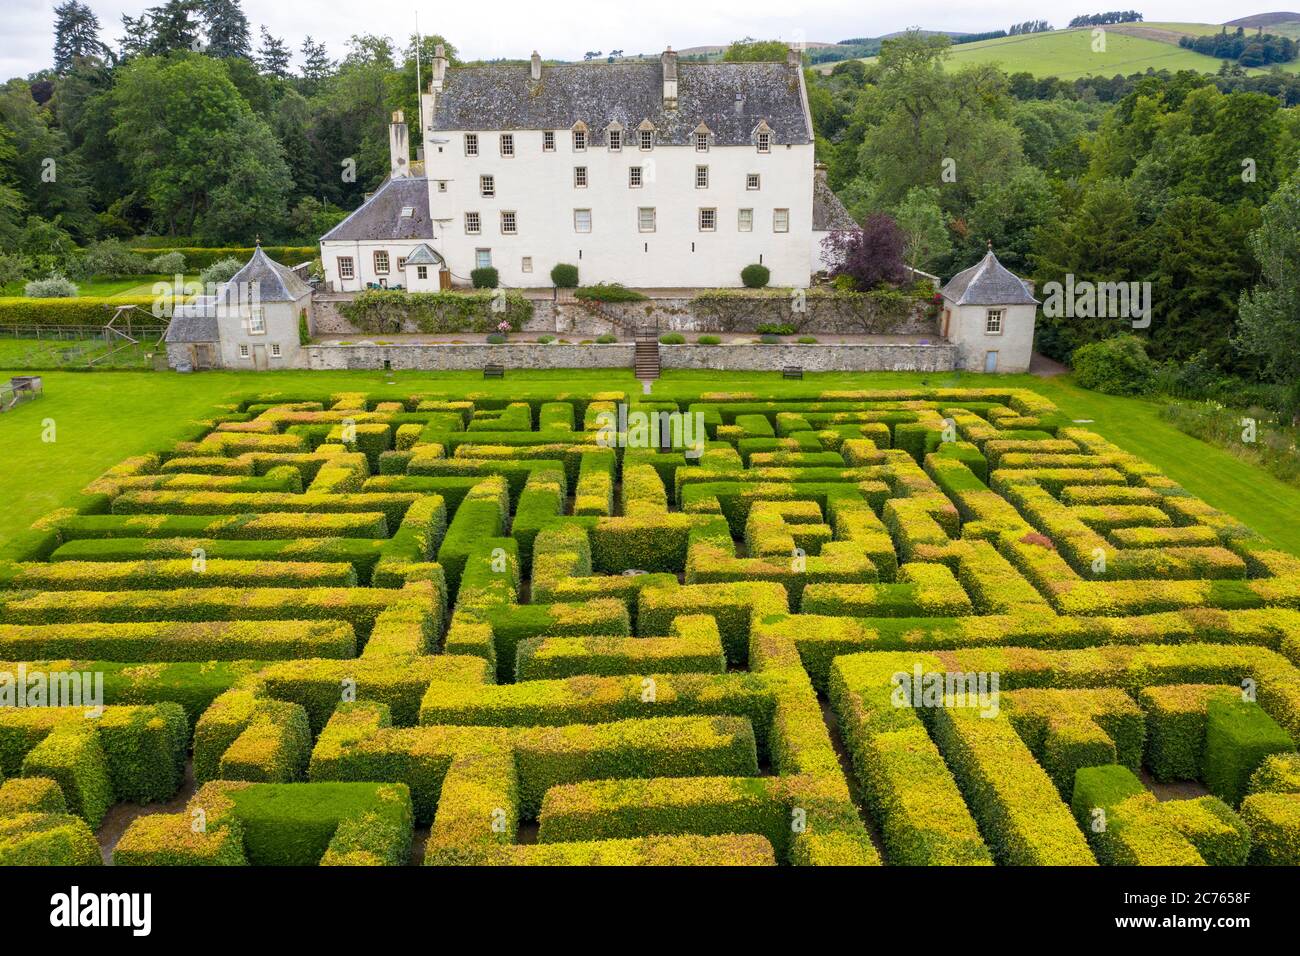 Innerleithen, Scotland, UK. 14 July, 2020, Aerial view of maze at Traquair House in the Scottish Borders, the oldest inhabited house in Scotland. The house is preparing to reopen to the public on Friday. Access to the maze will be limited to one household at a time. Iain Masterton/Alamy Live News Stock Photo